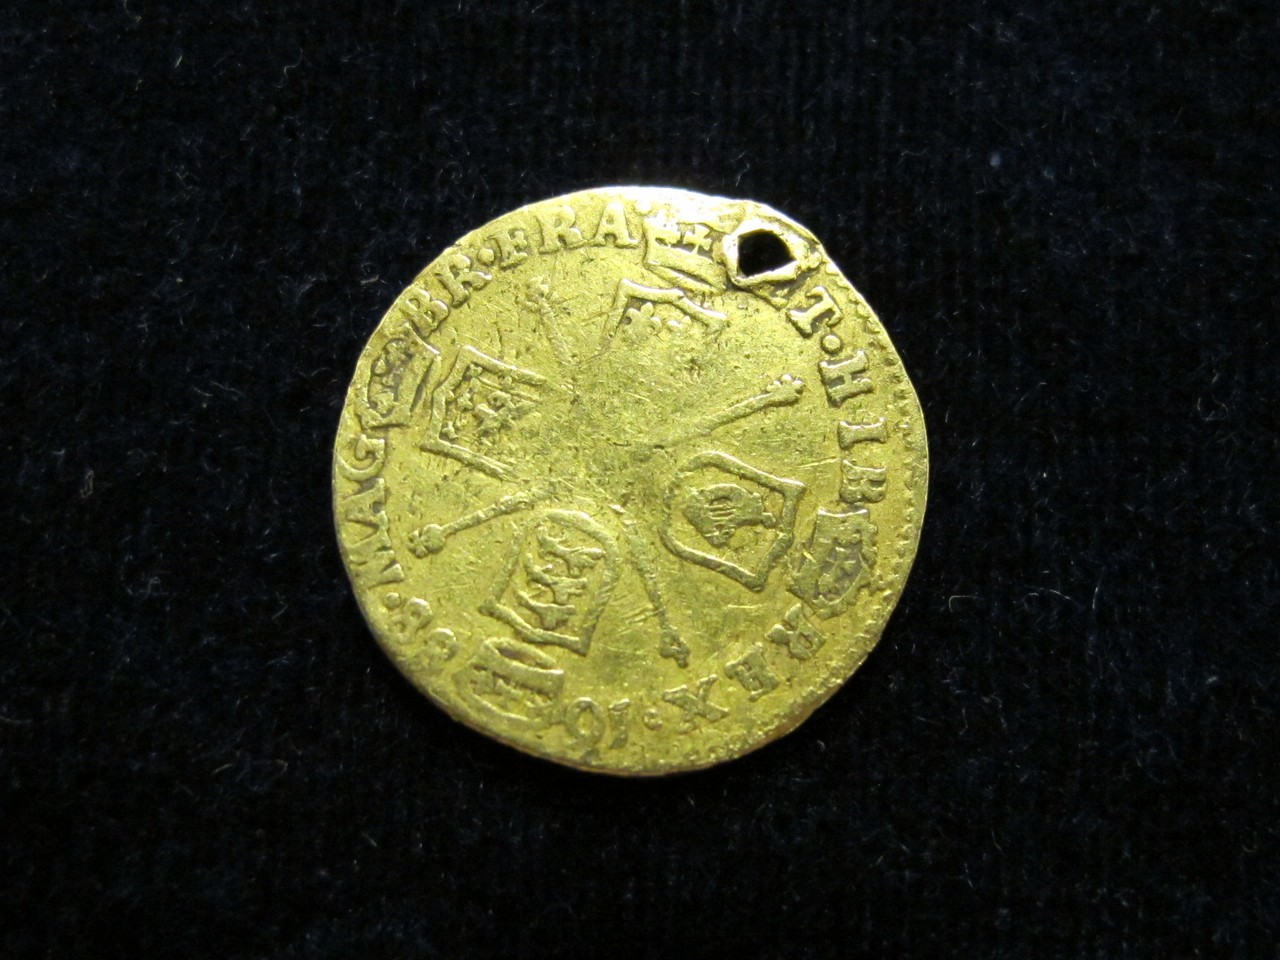 Half Guinea 1688 Fair but holed at top - Image 2 of 2